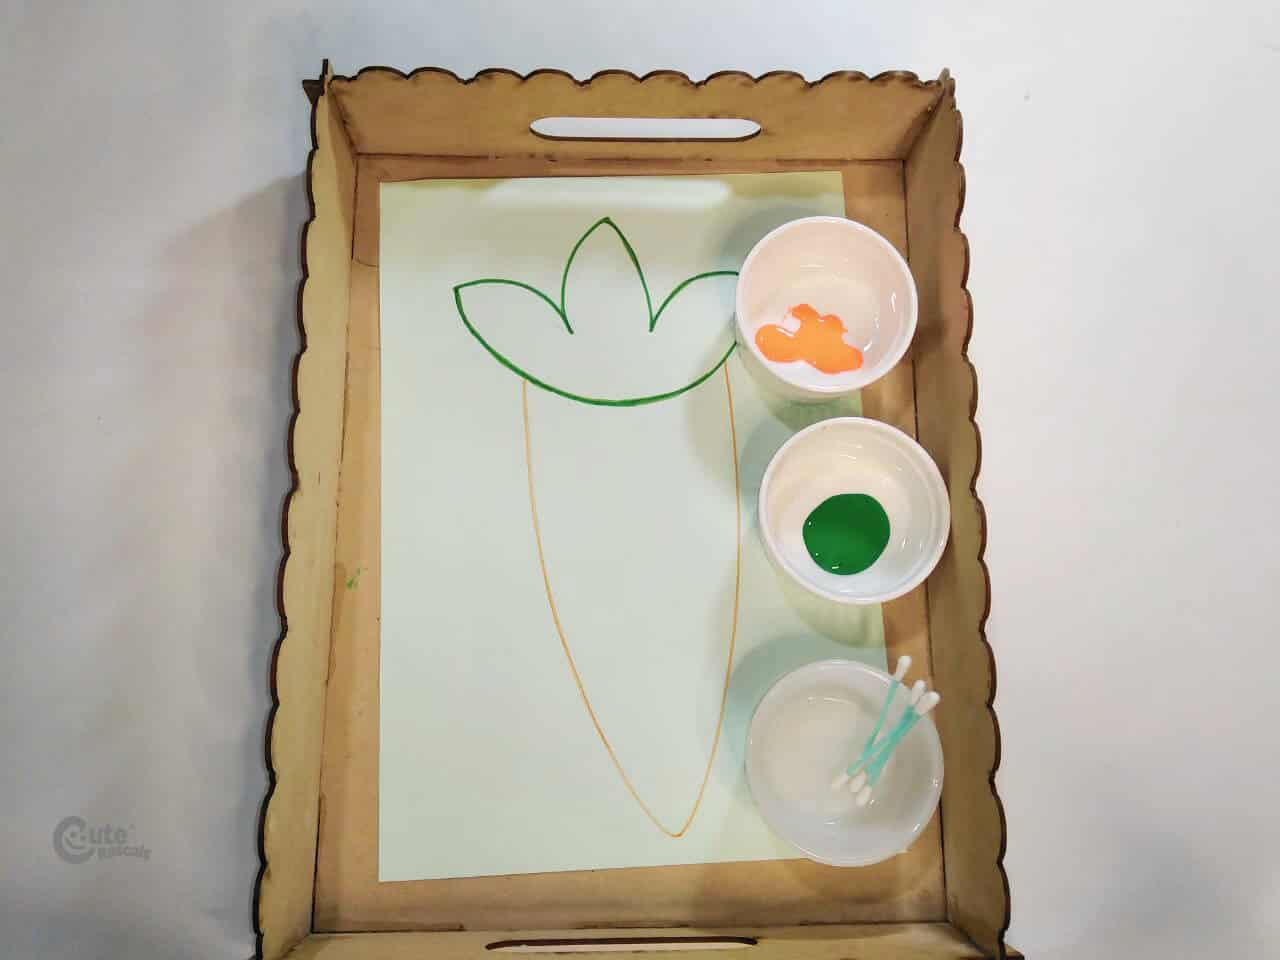 Materials Carrot Made With Cotton Swabs Painting Crafts for Kids Activity